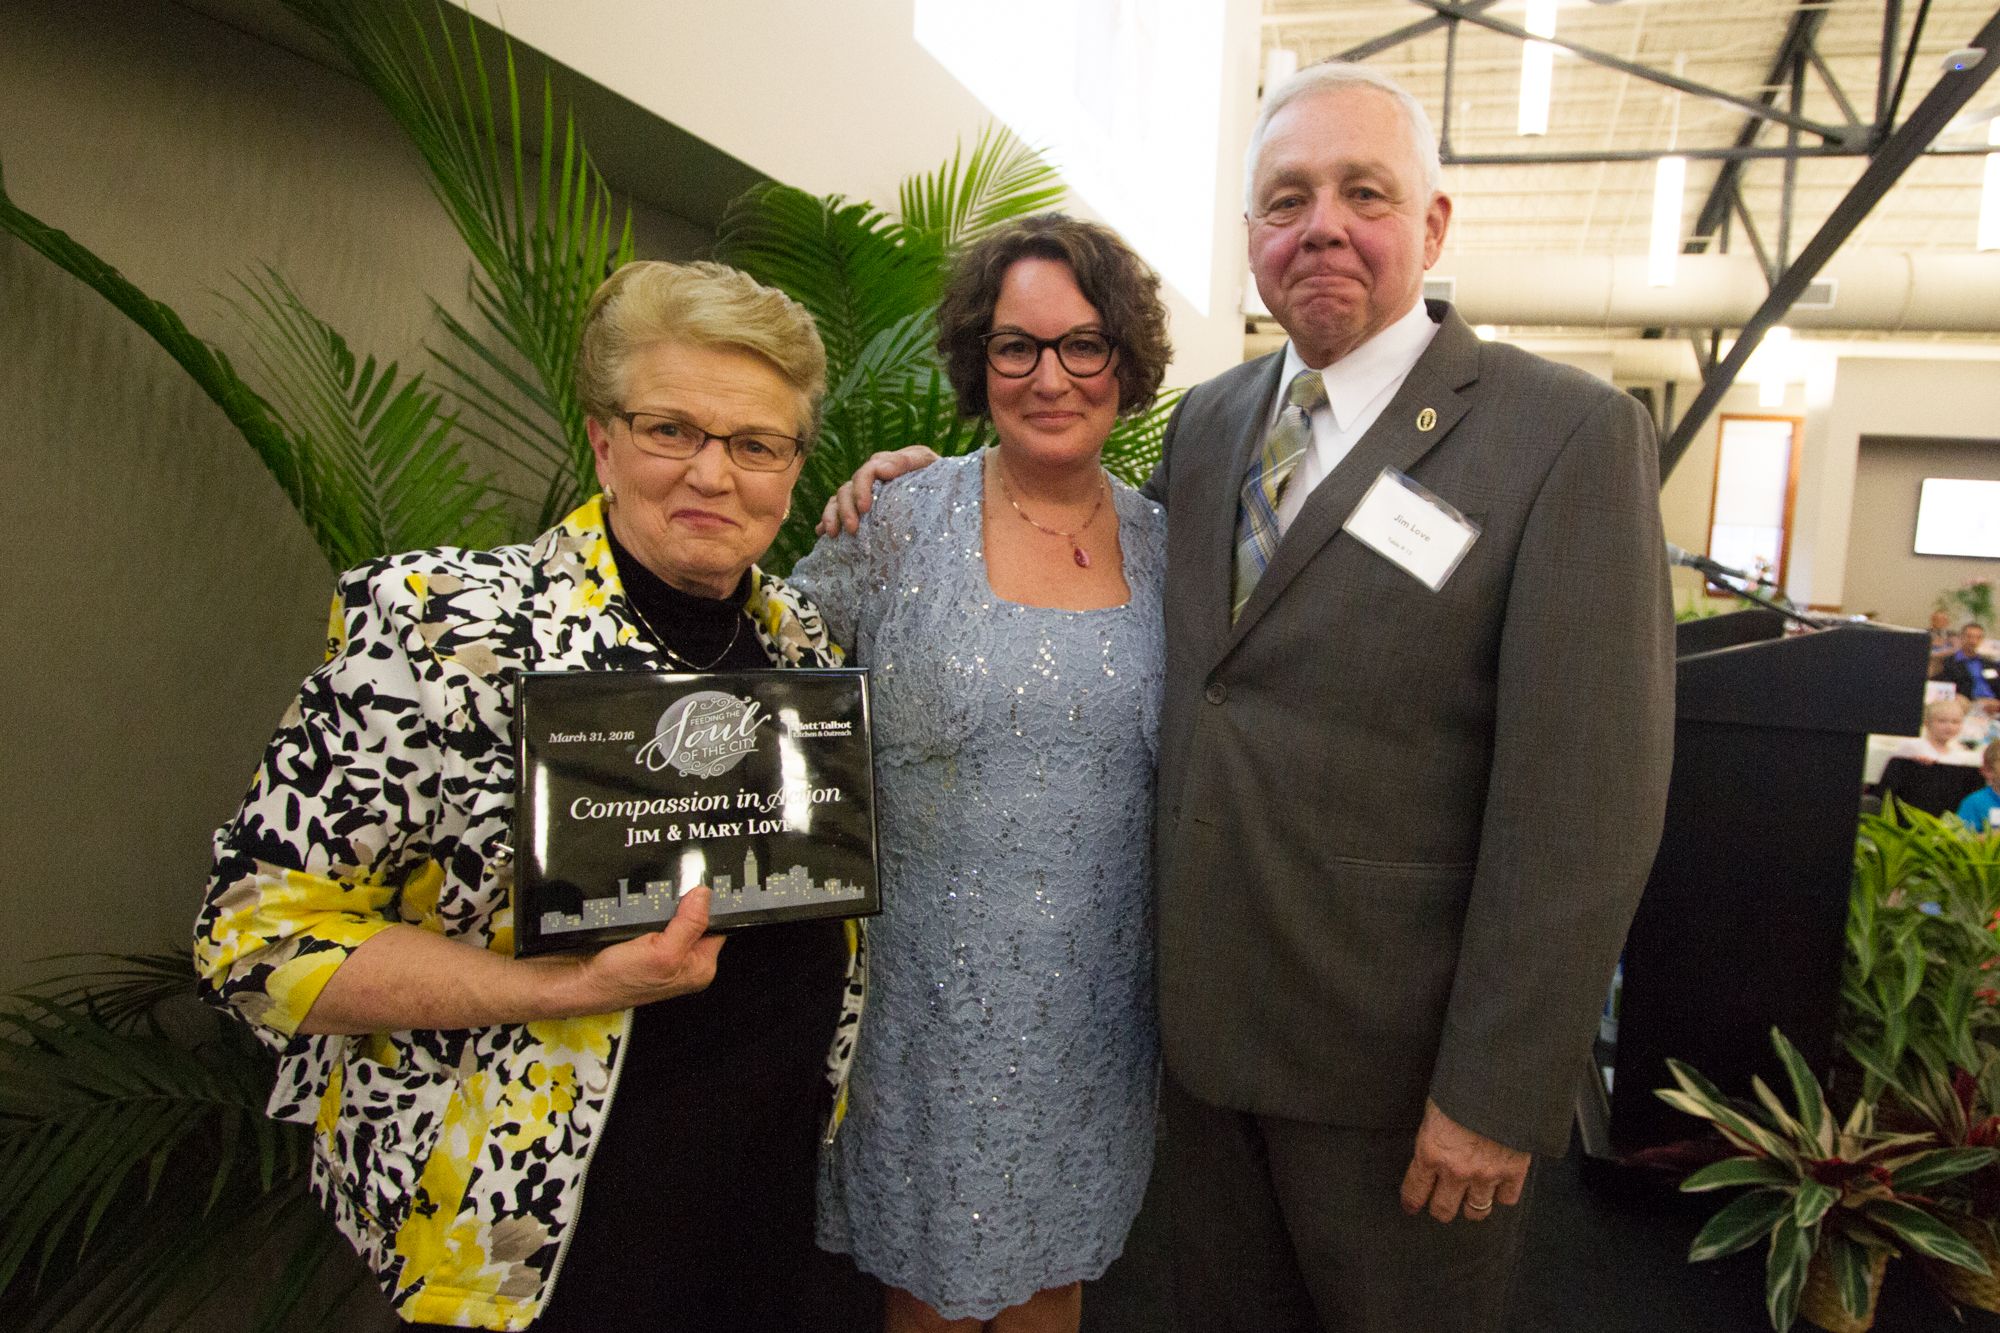 Mary Love, Susanne Blue, Jim Love after presentation of Compassion in Action Award.